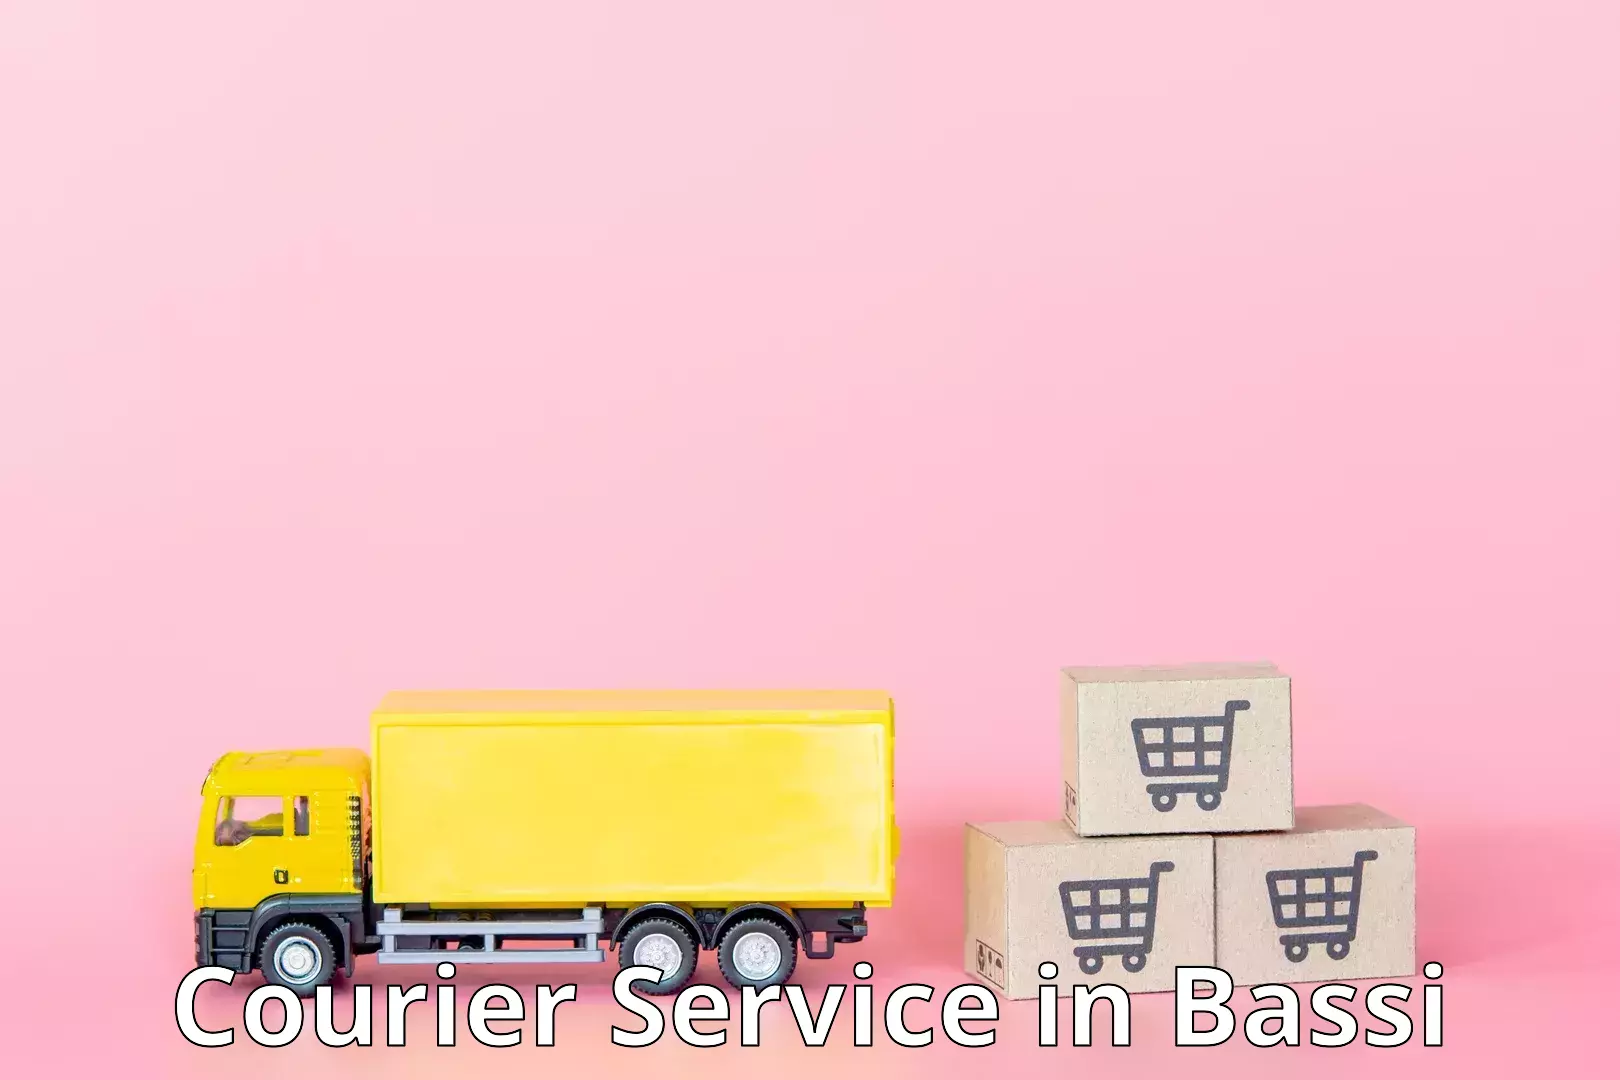 Express mail solutions in Bassi